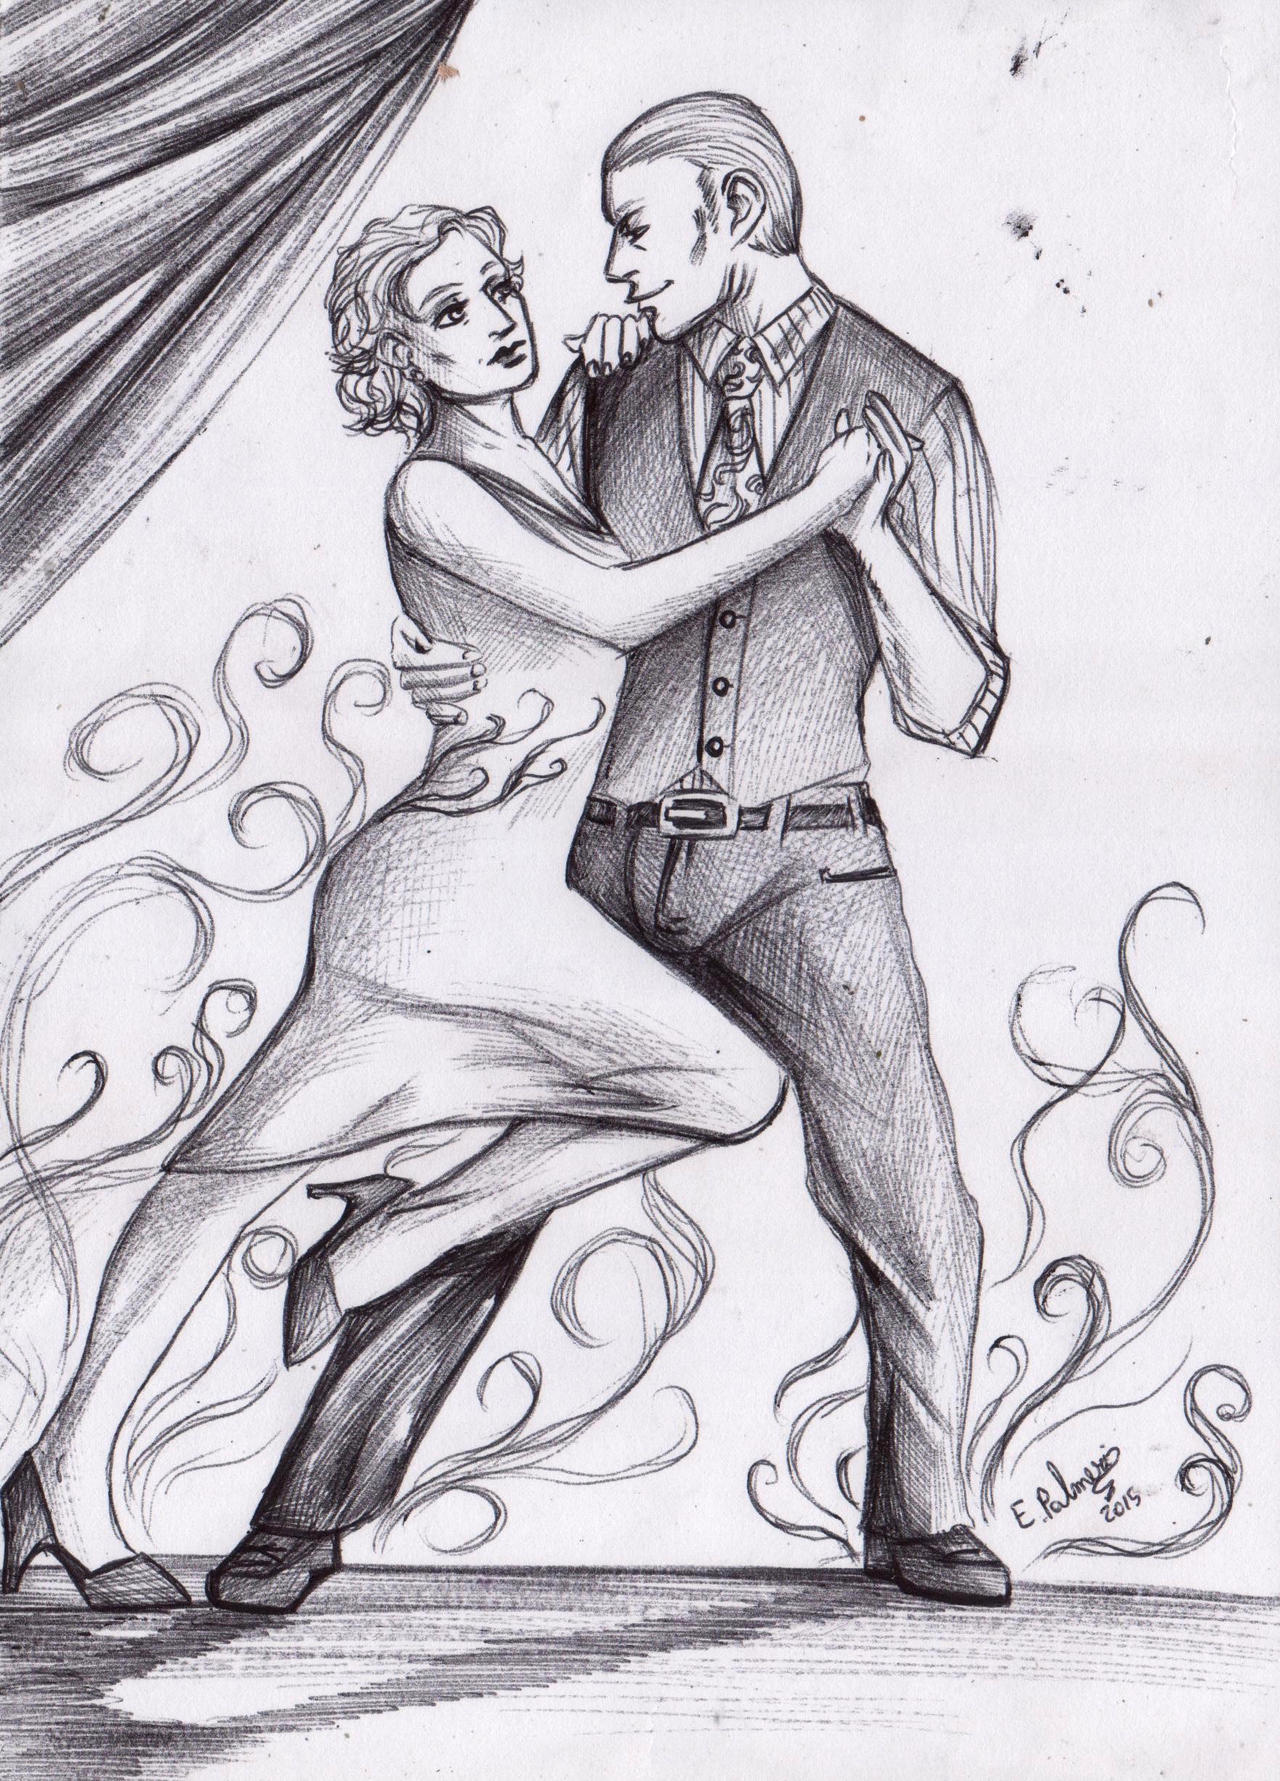 Hannibal twitter requests - Hannibal and Bedelia by FuriarossaAndMimma